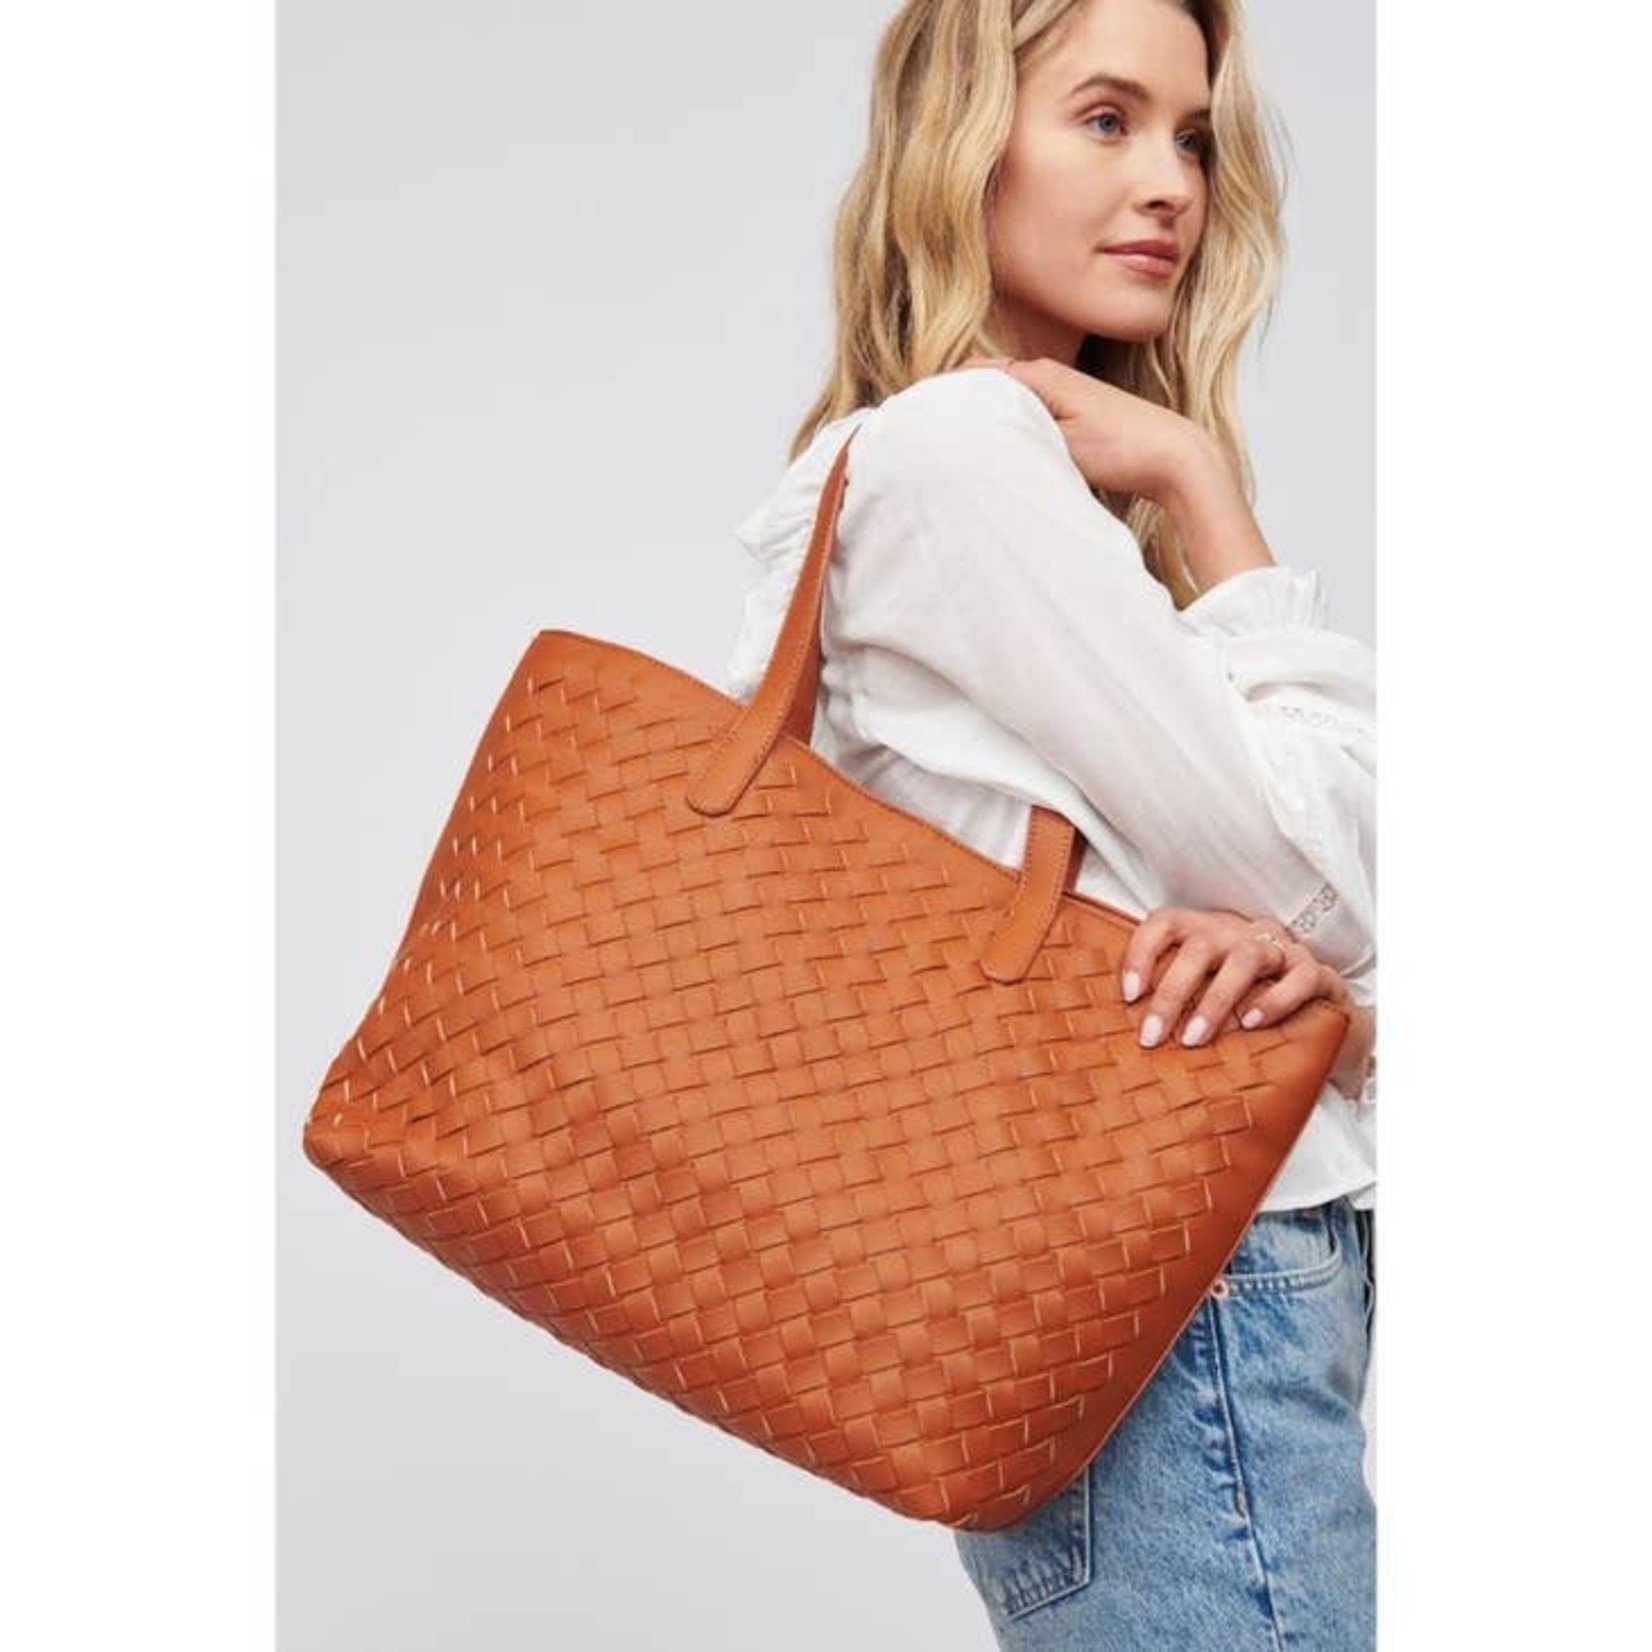 The Medium Transport Tote: Woven Leather Edition